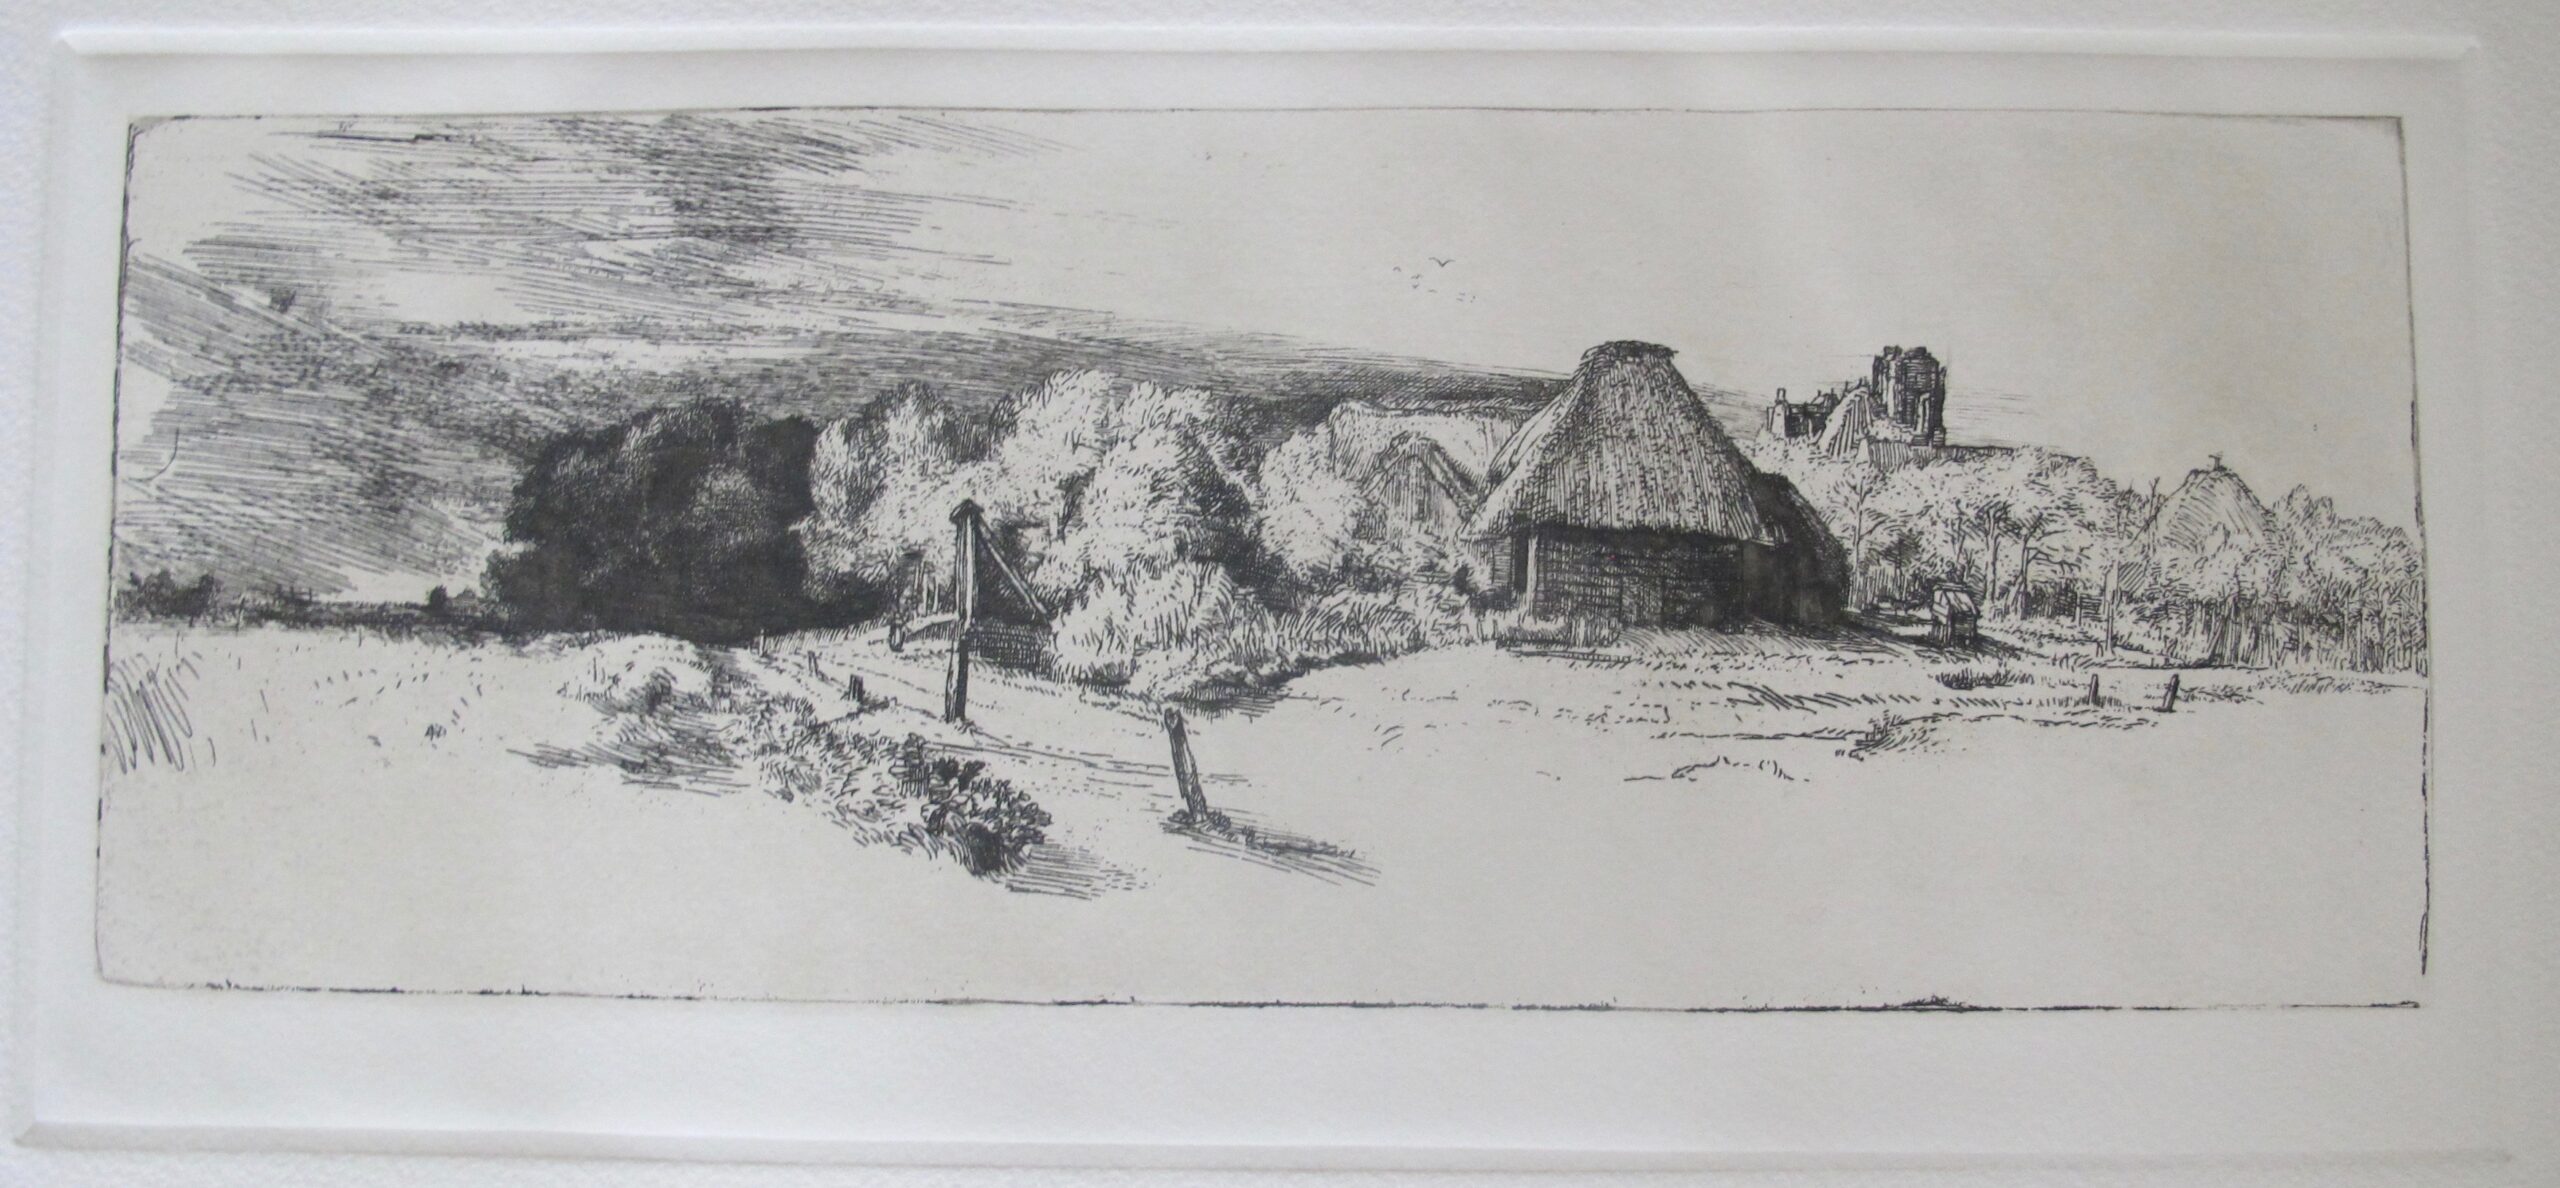 REMBRANDT LANDSCAPE WITH TREES FARM BUILDING & TOWER Etching by Amand Durand